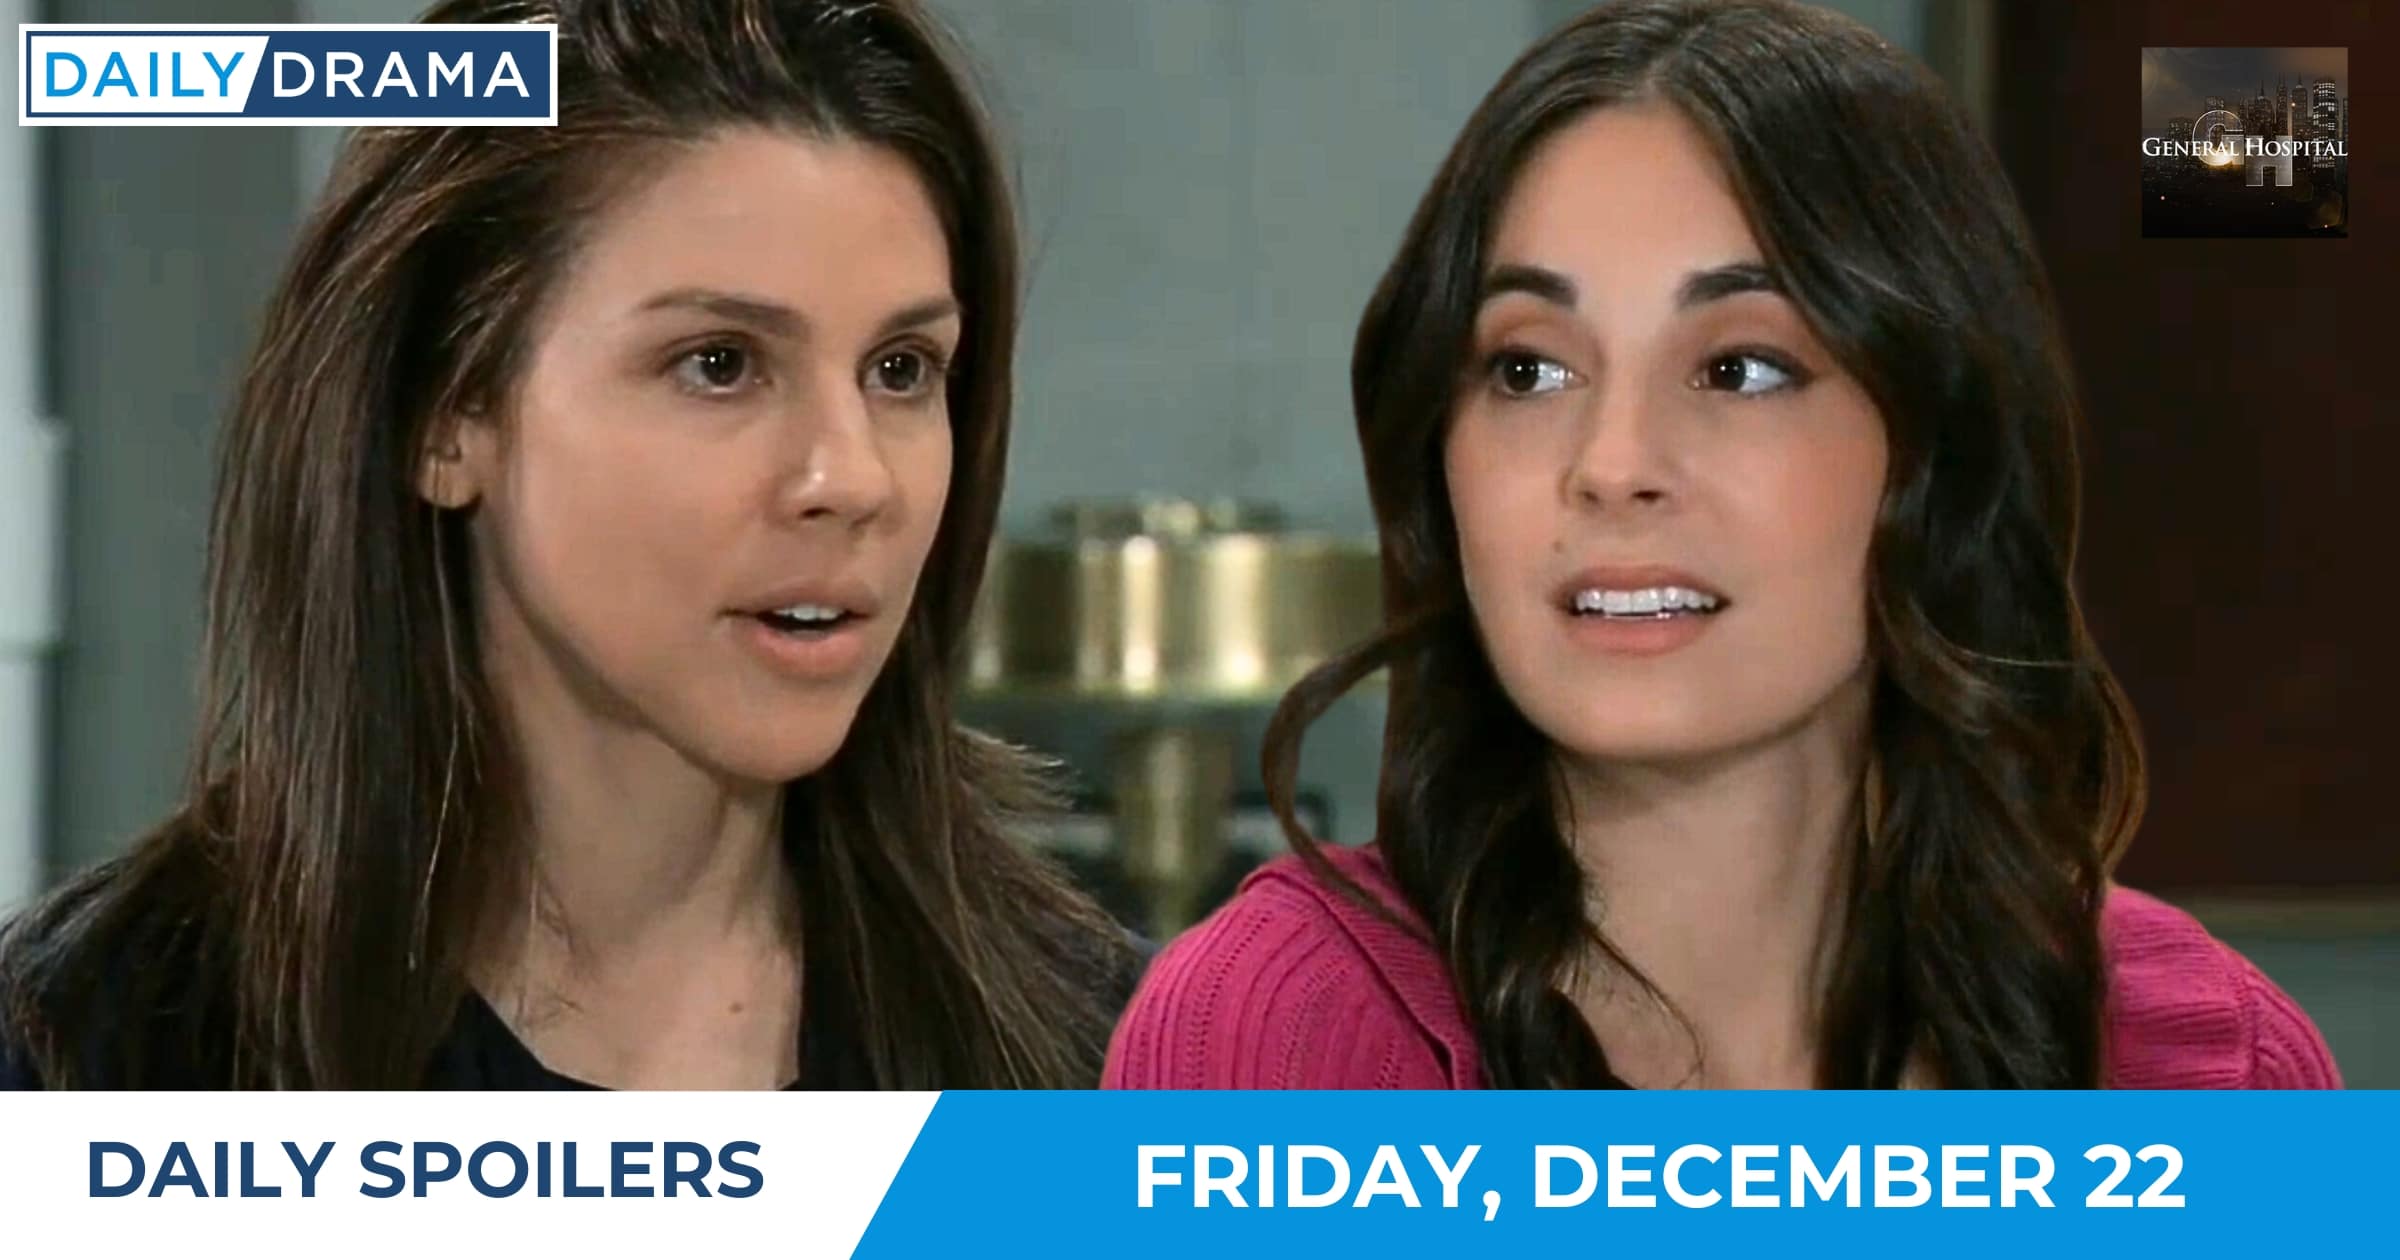 General Hospital Daily Spoilers - Dec 22 - Molly and Kristina